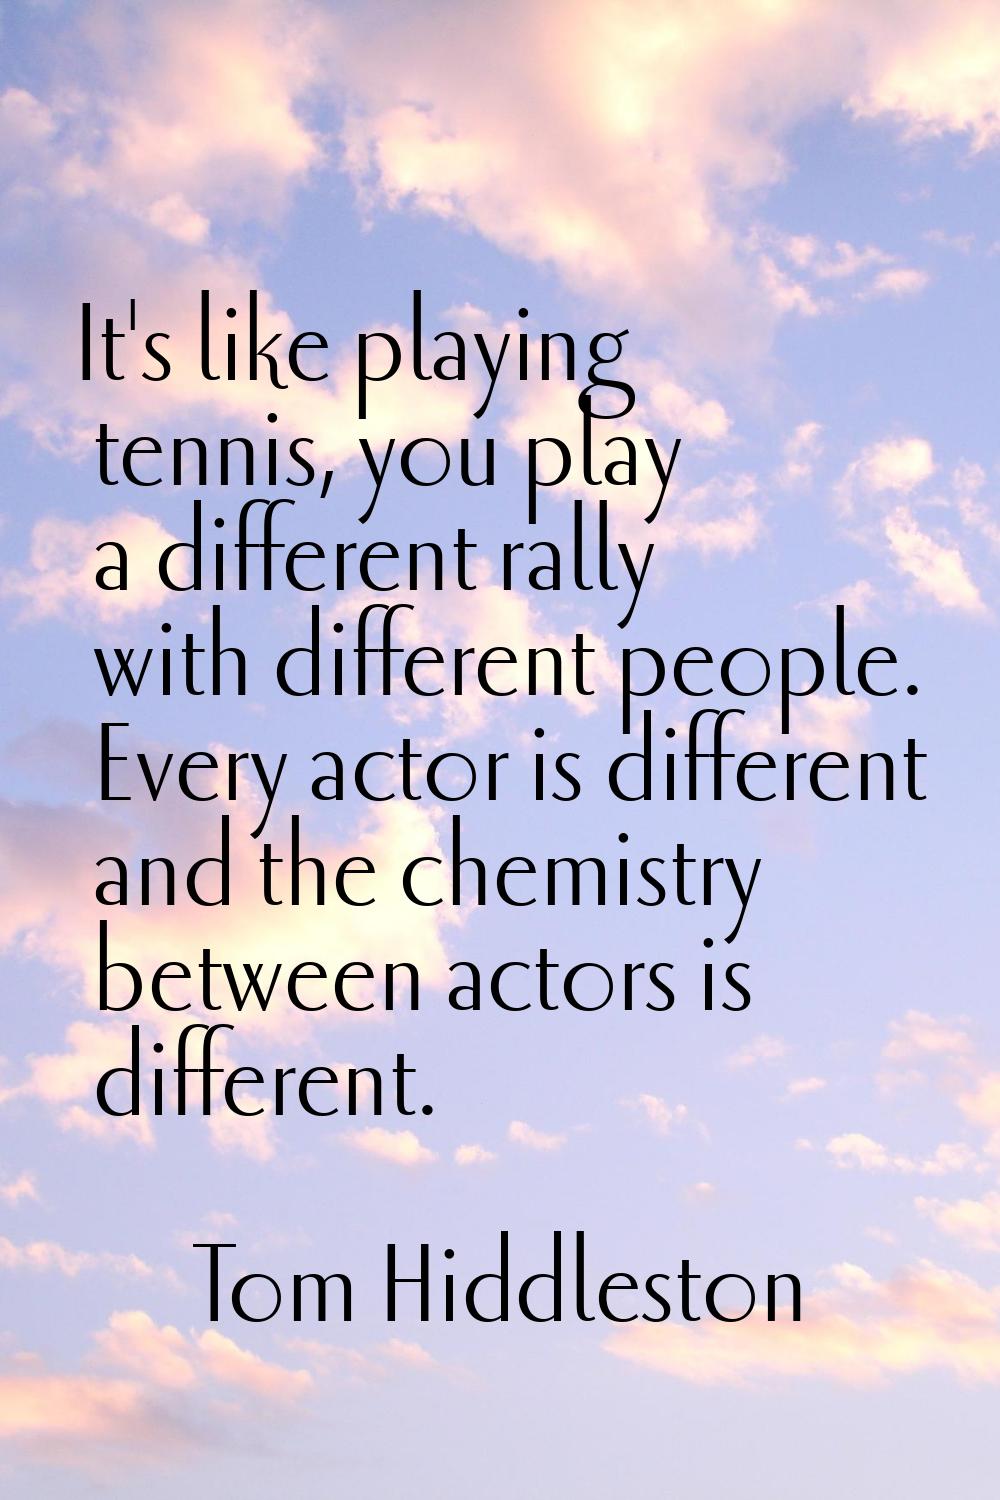 It's like playing tennis, you play a different rally with different people. Every actor is differen